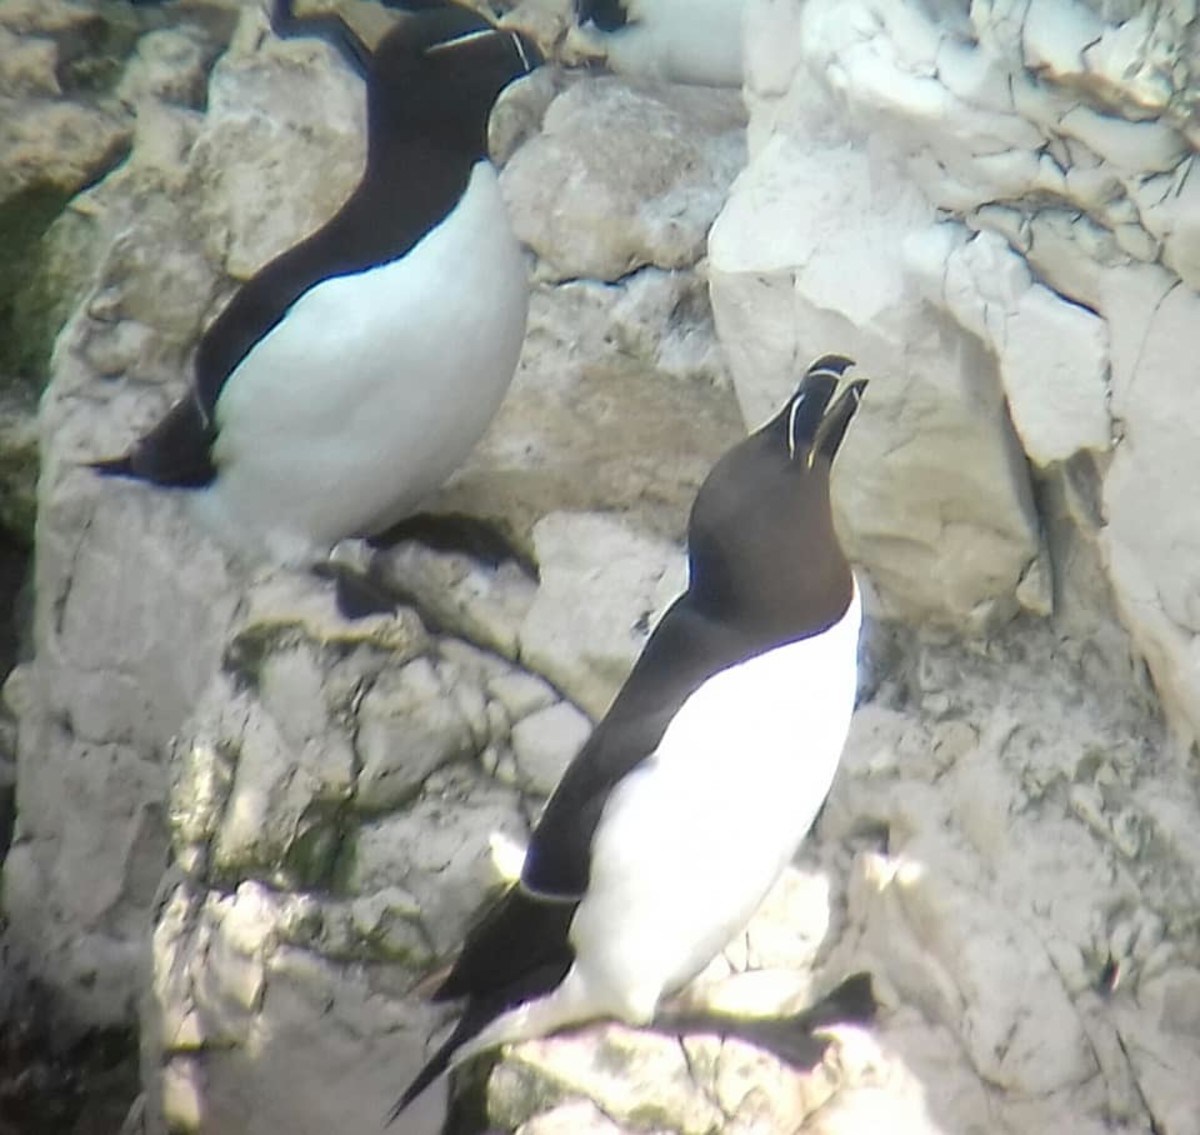 Razorbills are also a common sight on Flamborough Cliffs during the breeding season, as are the Auk relatives, the common guillemot.